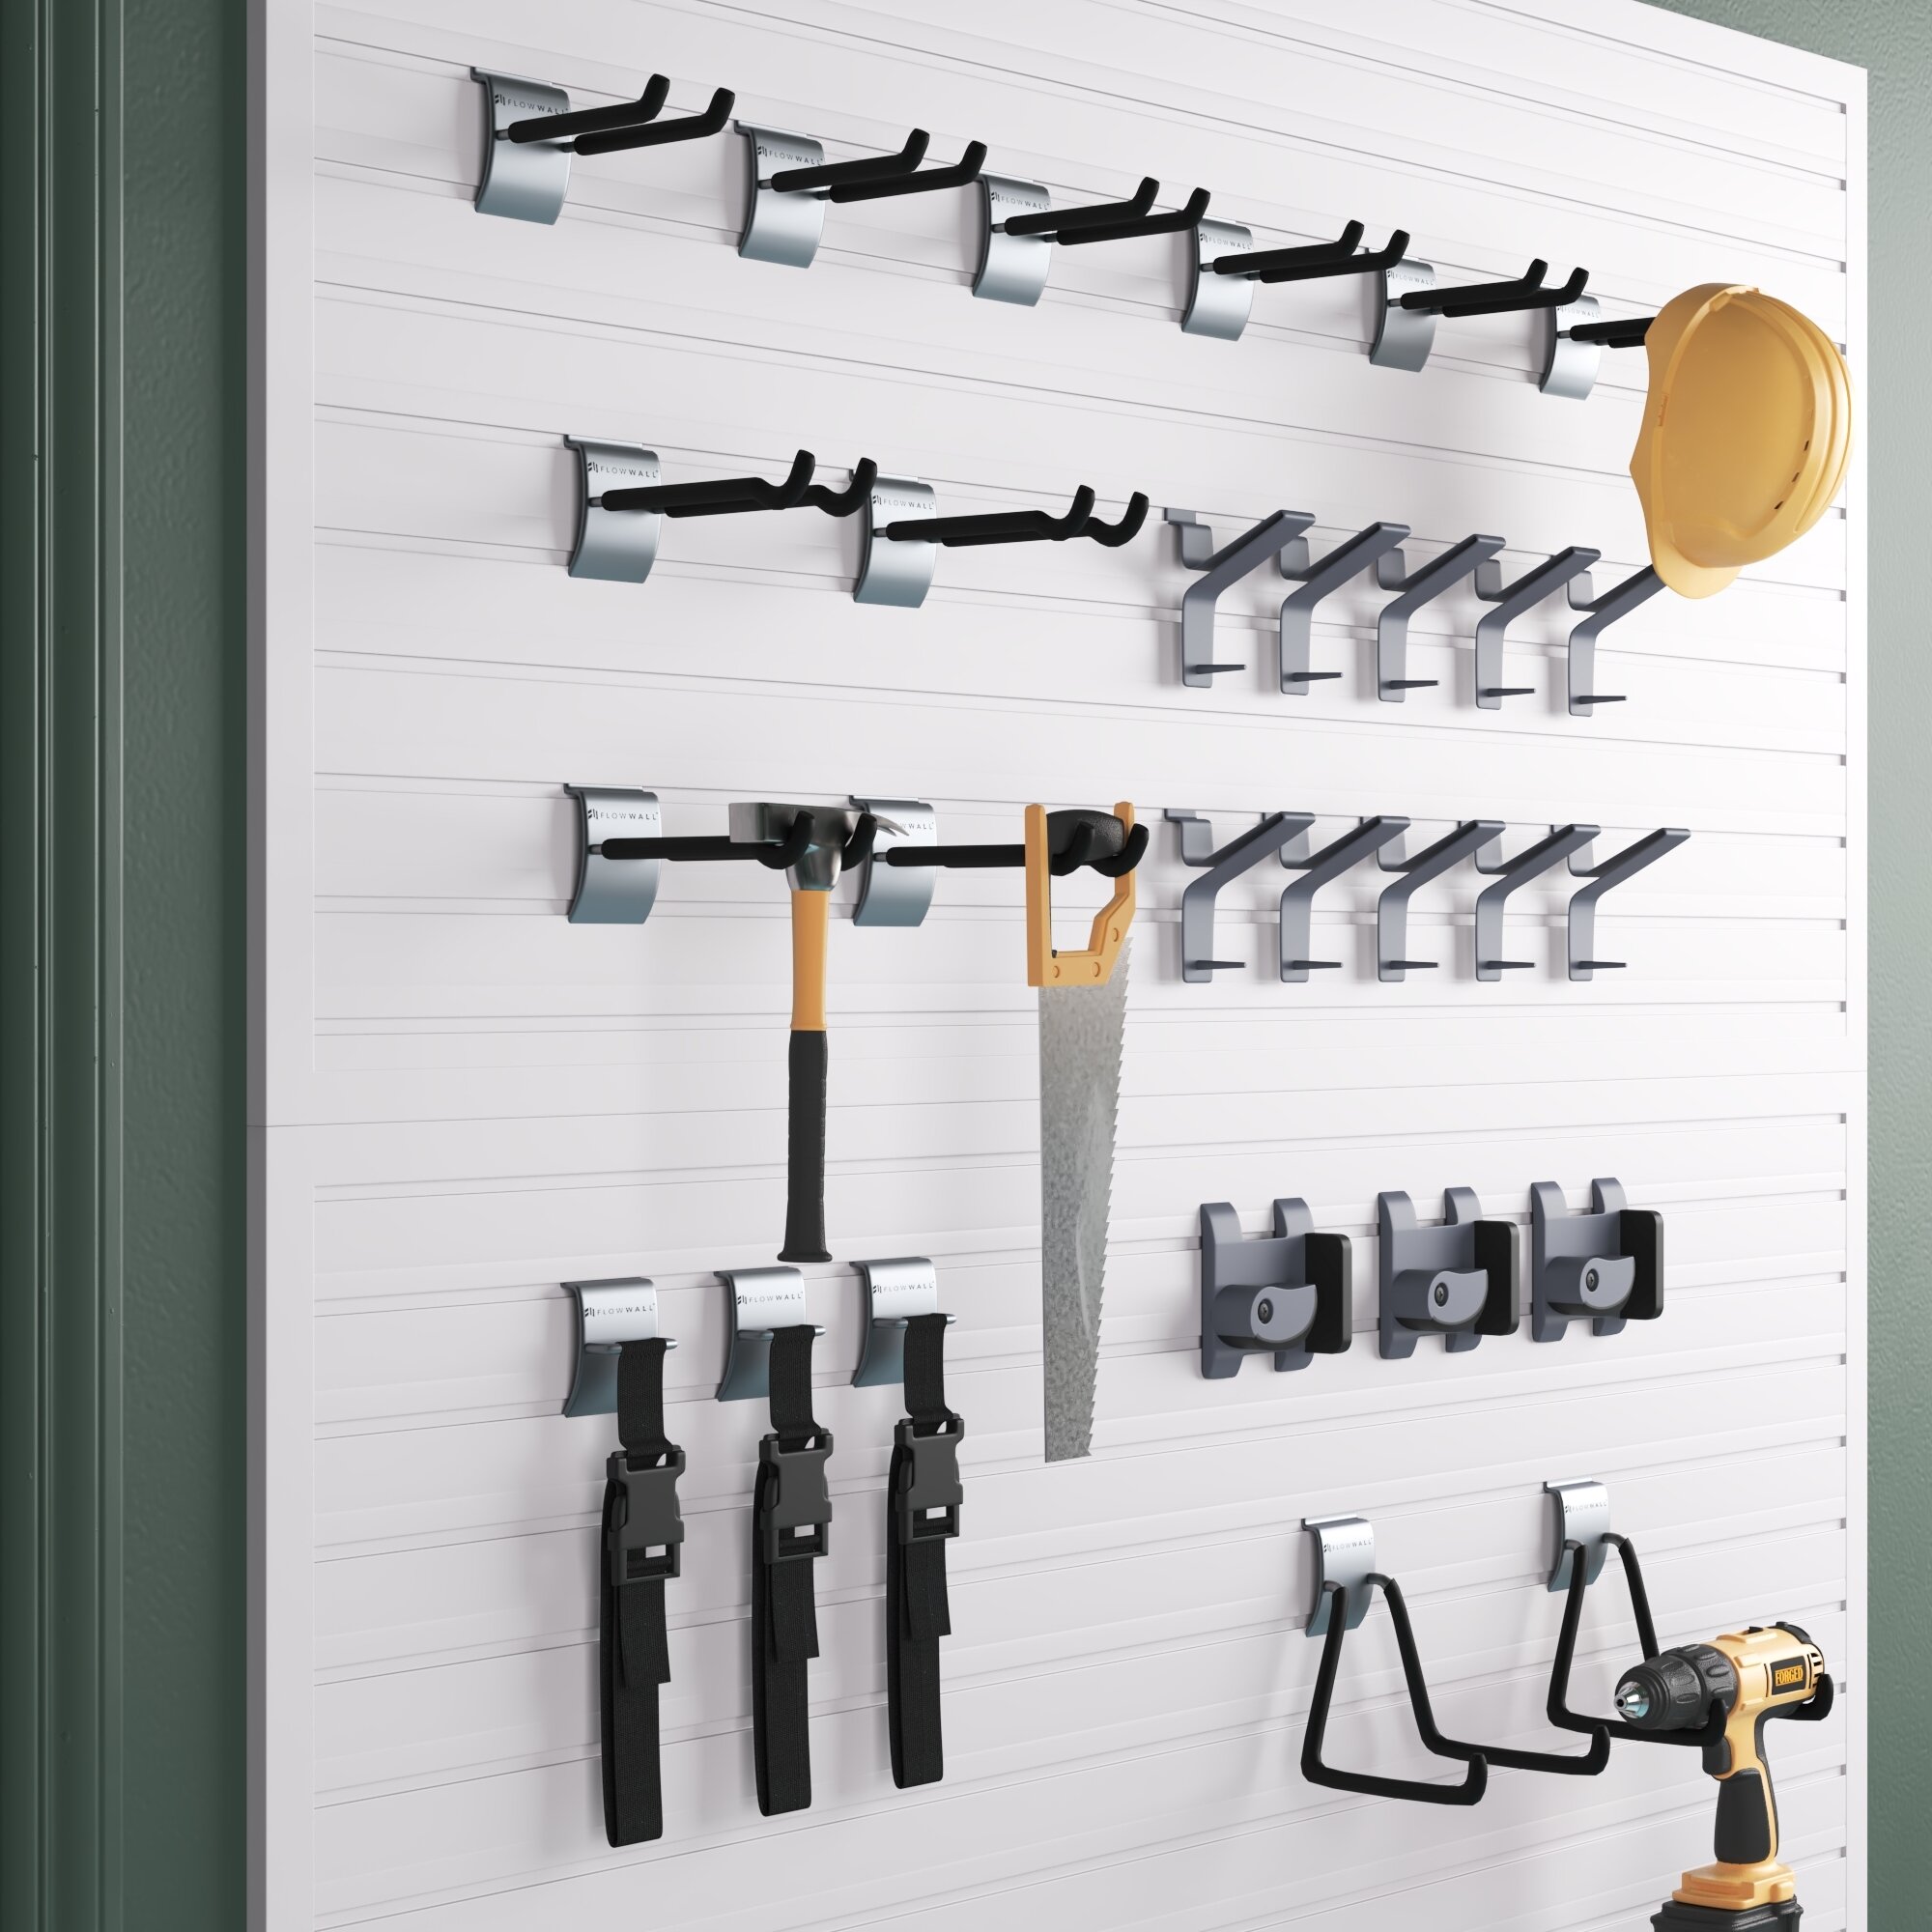 FastTrack Garage Wall Panel Accessory Kit (13-Piece)